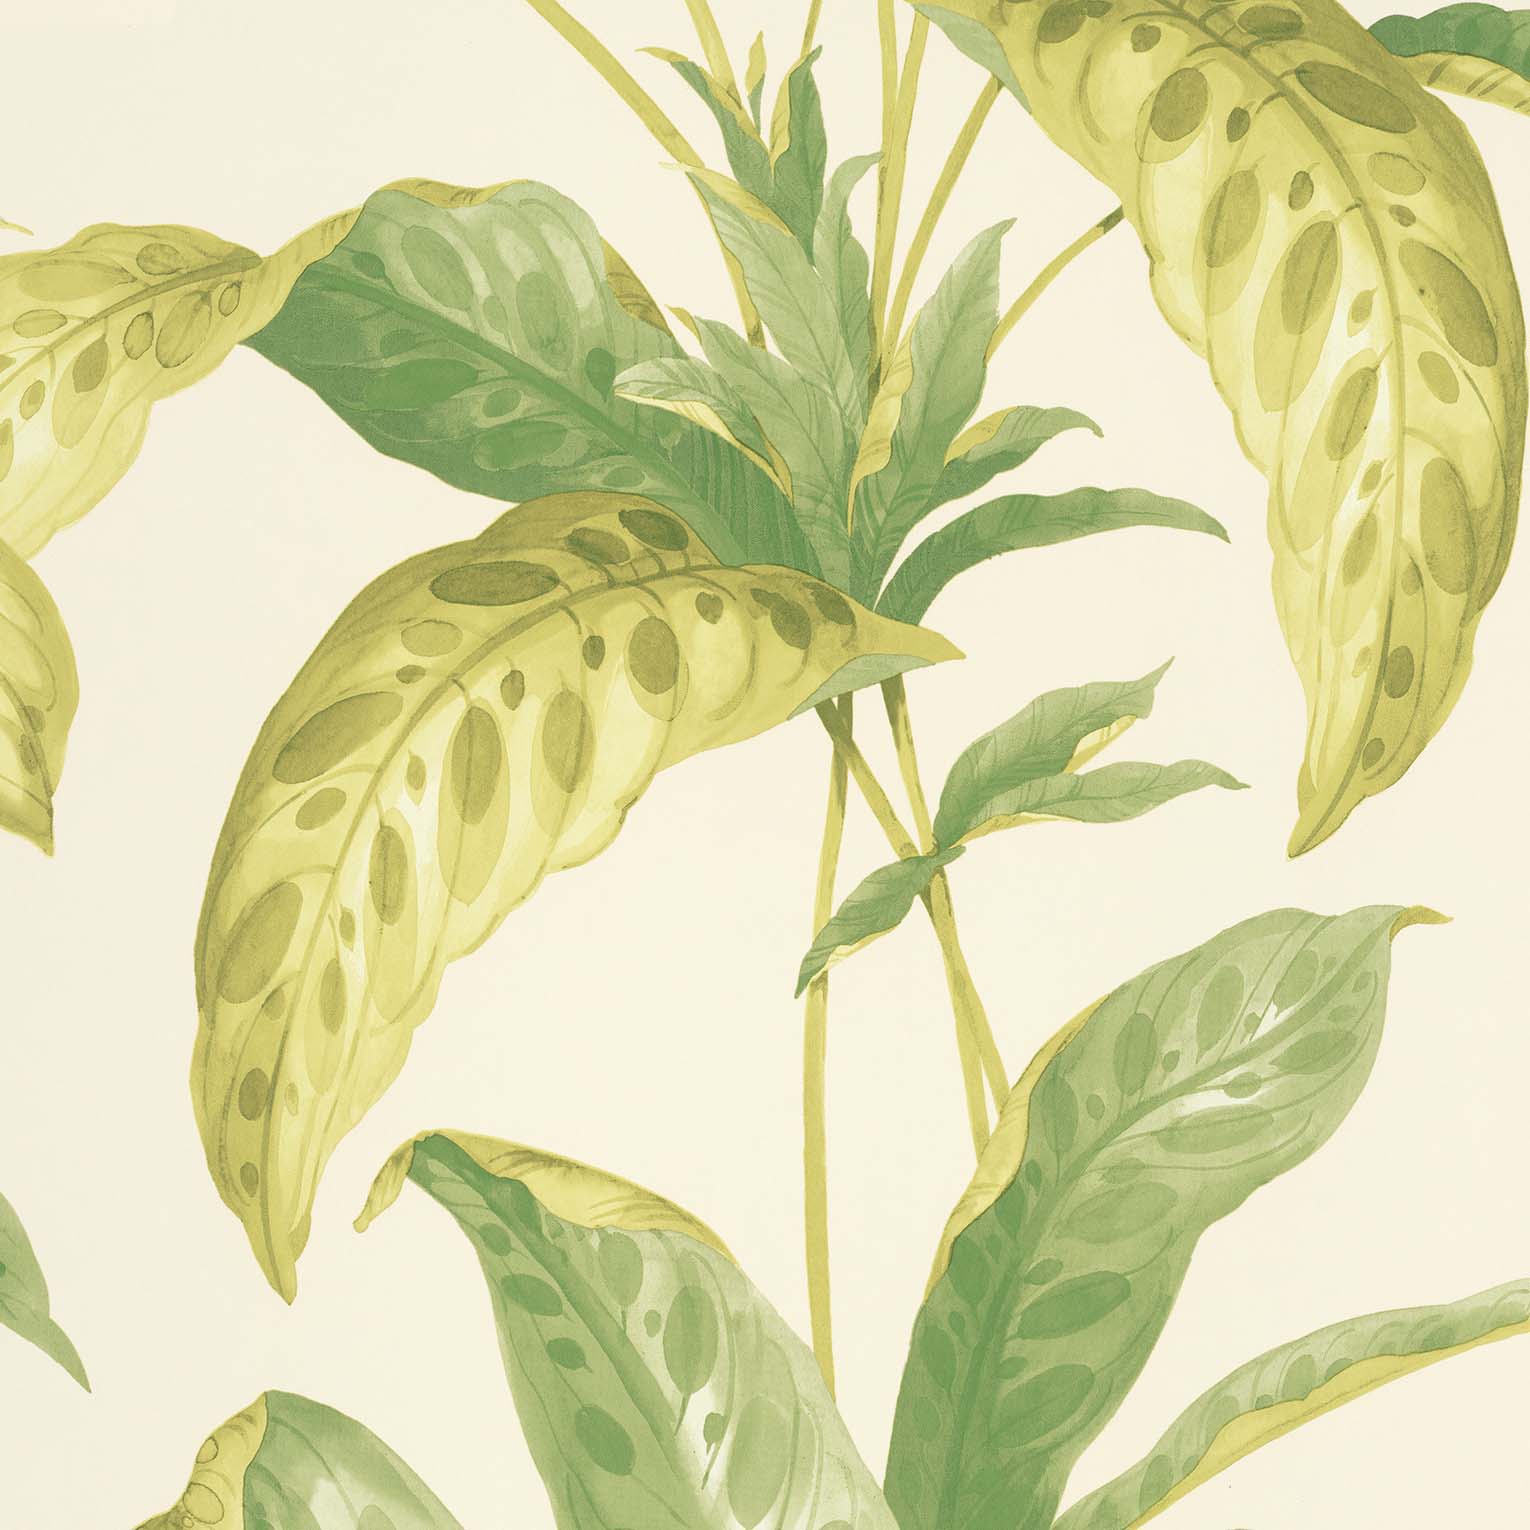 images/productimages/small/tropicane-chelsea-green-ii-1700x1530.jpg